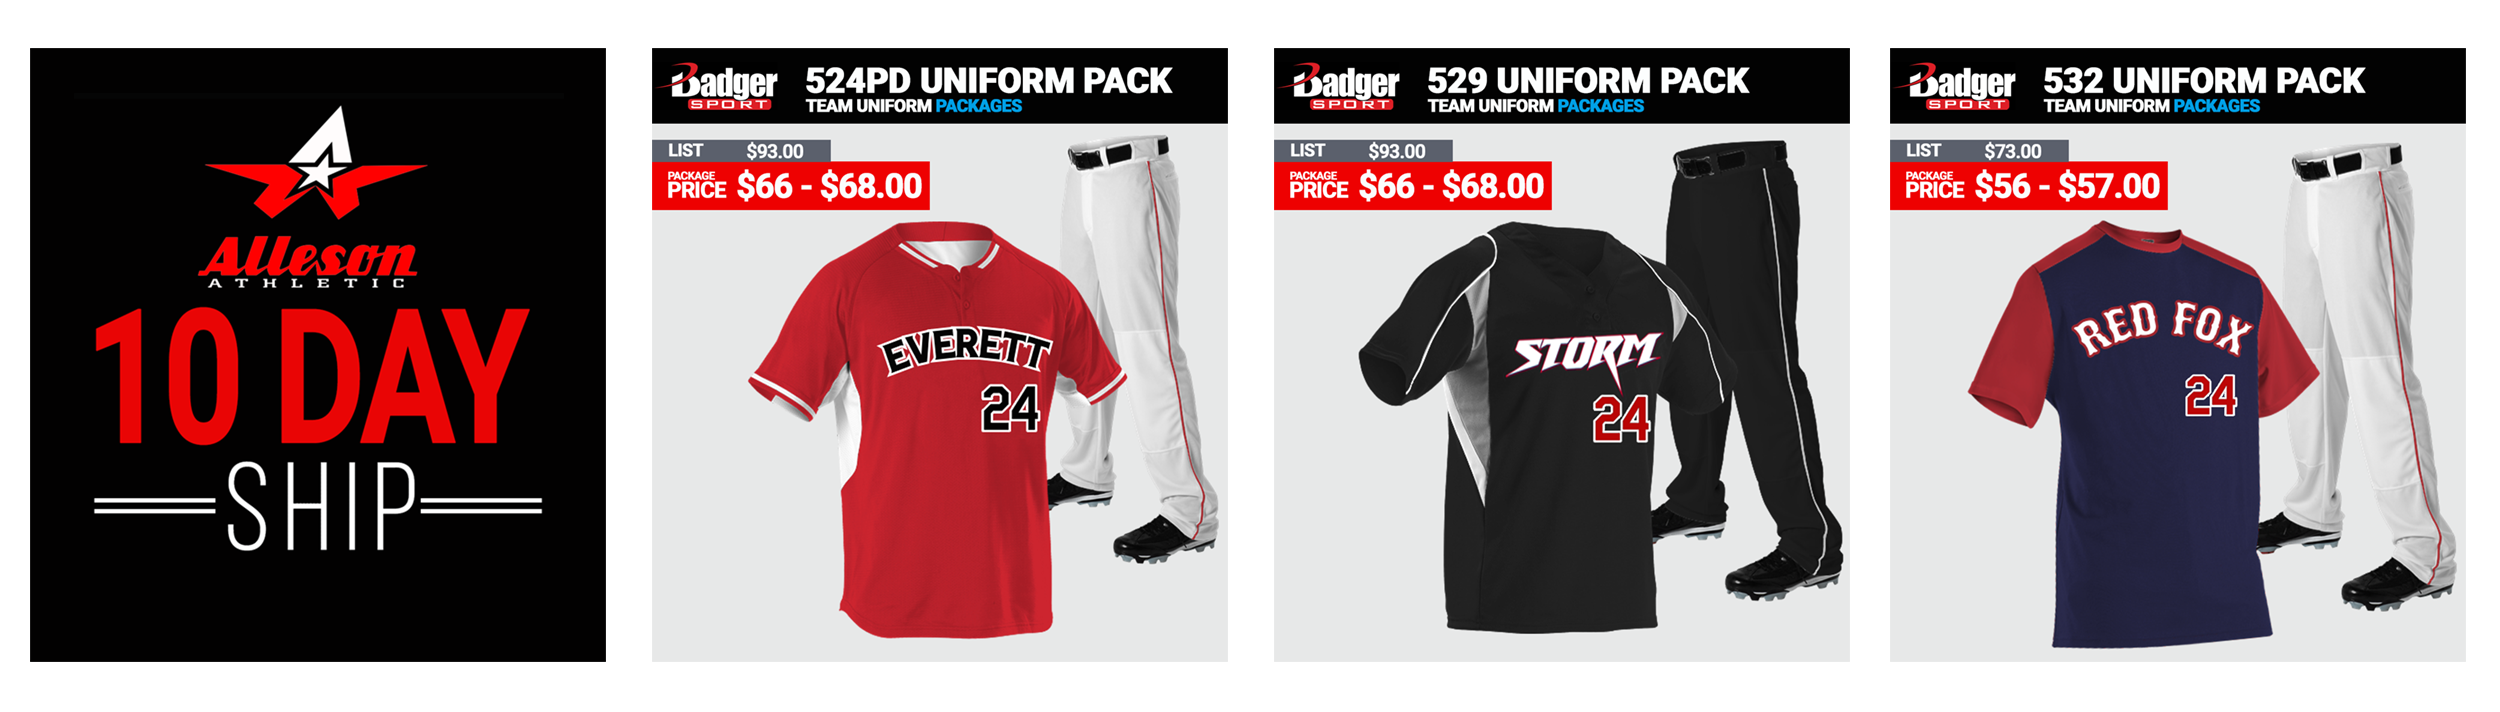 Alleson Baseball Uniform Packages